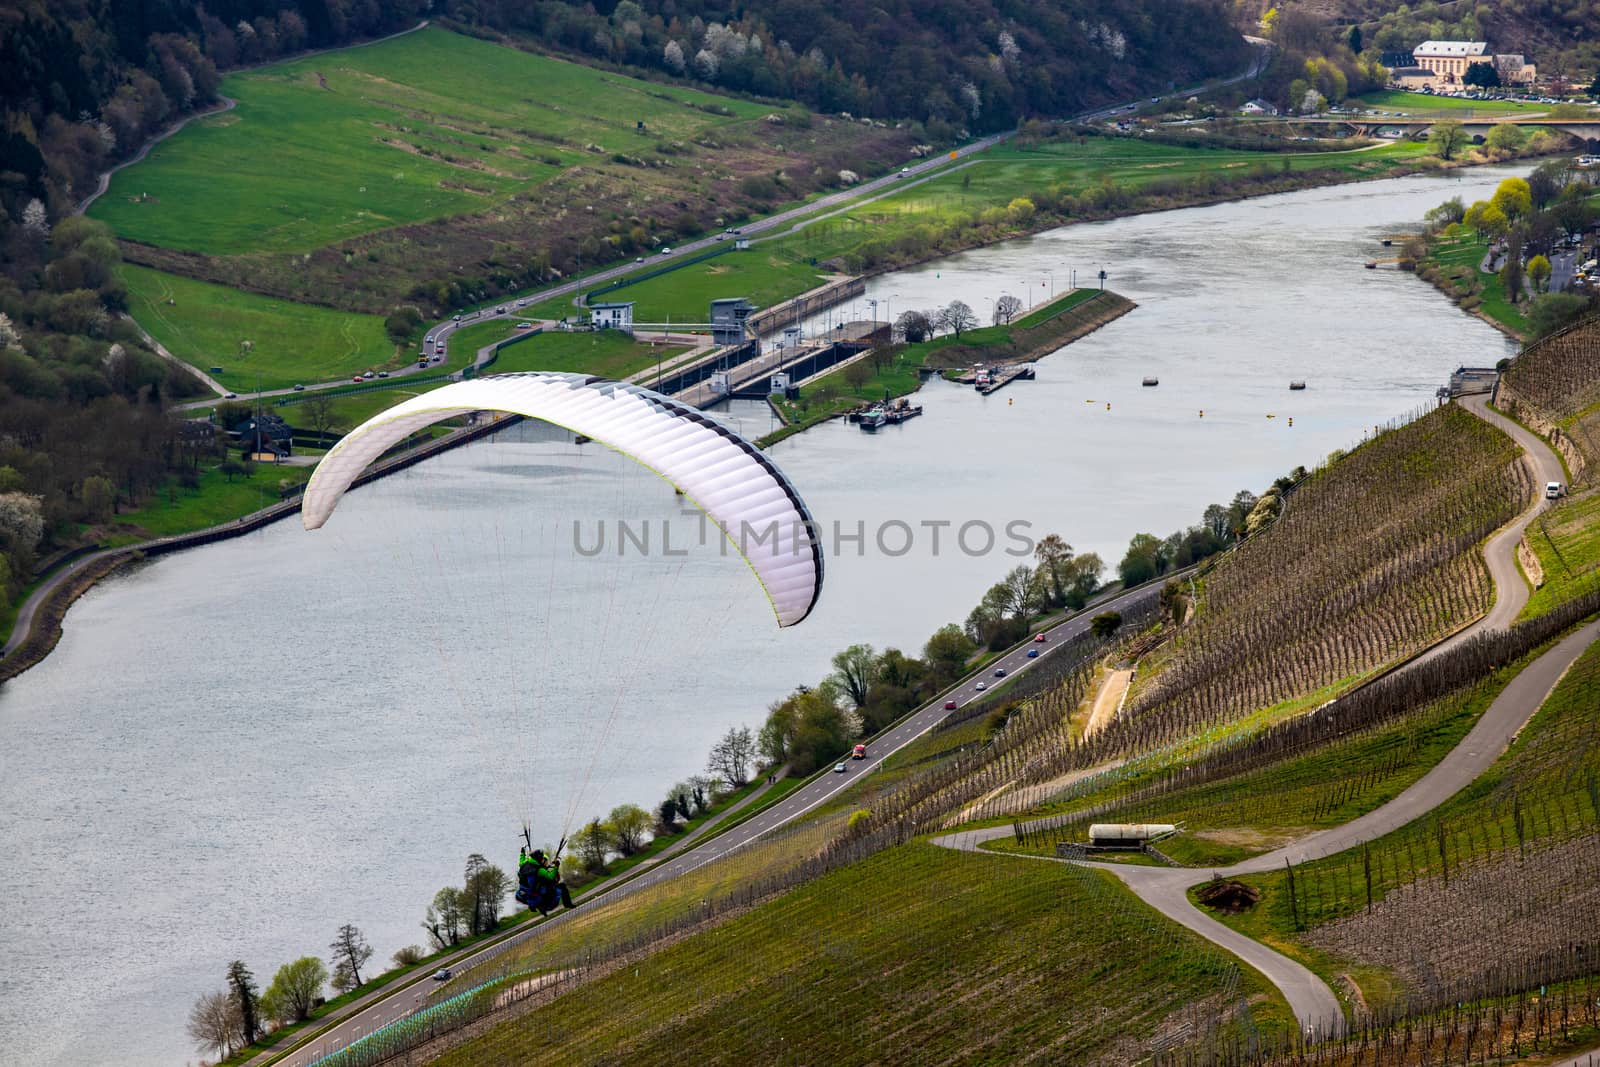 Paraglider over river Moselle, Germany by reinerc